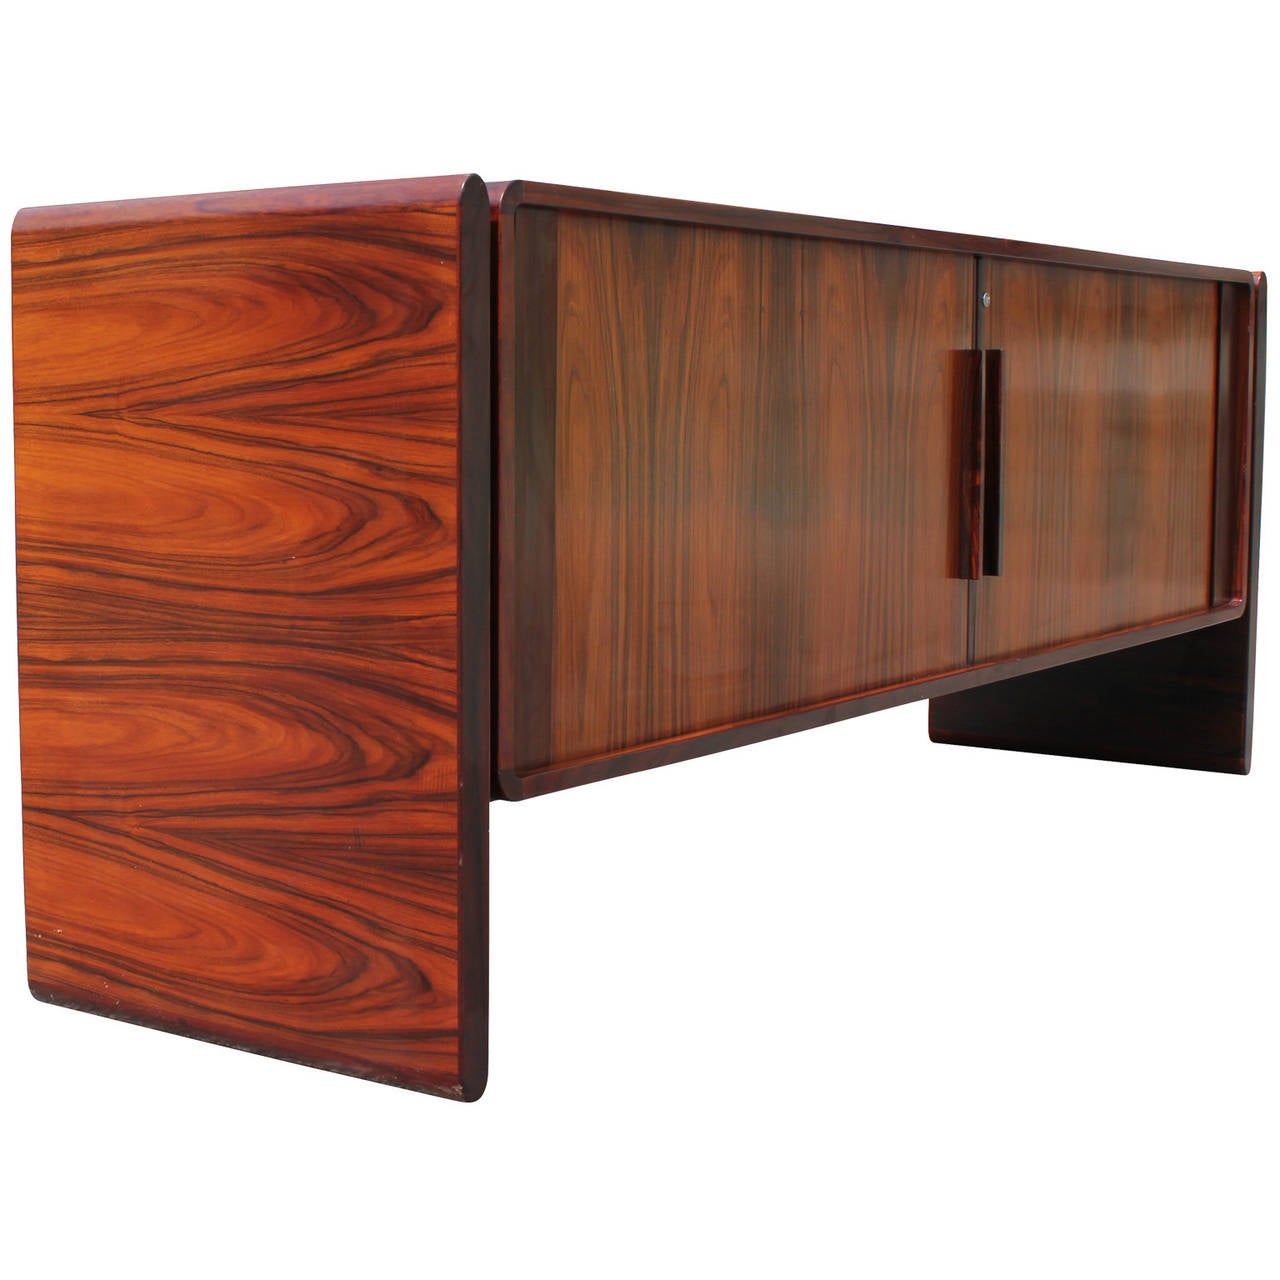 Excellent tambour door rosewood sideboard by Dyrlund. Rosewood has an excellent grain. Left side has two shallow drawers and a pull out drawer for filing. Right side has one small drawer and a  large open space. Two legs float agains the case